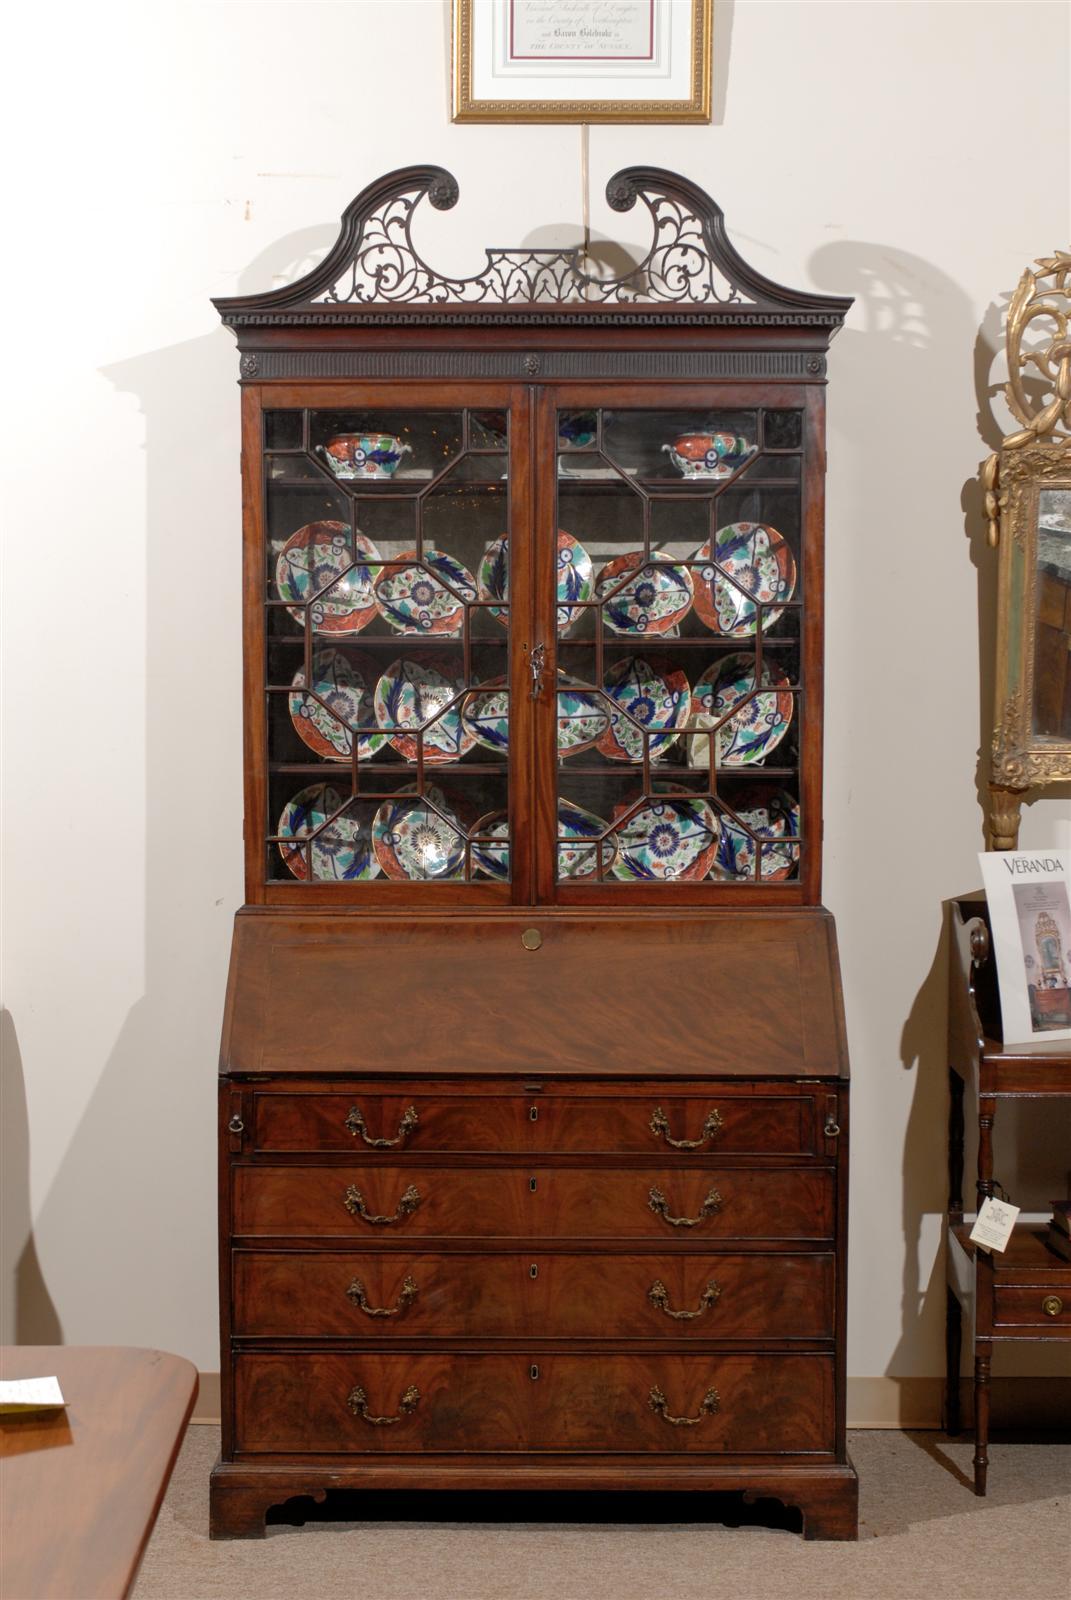 An 18th century George III mahogany bureau bookcase with fretwork swan neck pediment, glazed doors with geometric 15 pane sash work, slant front enclosing a fitted interior above five drawers and bracket feet. English in origin and dating from the